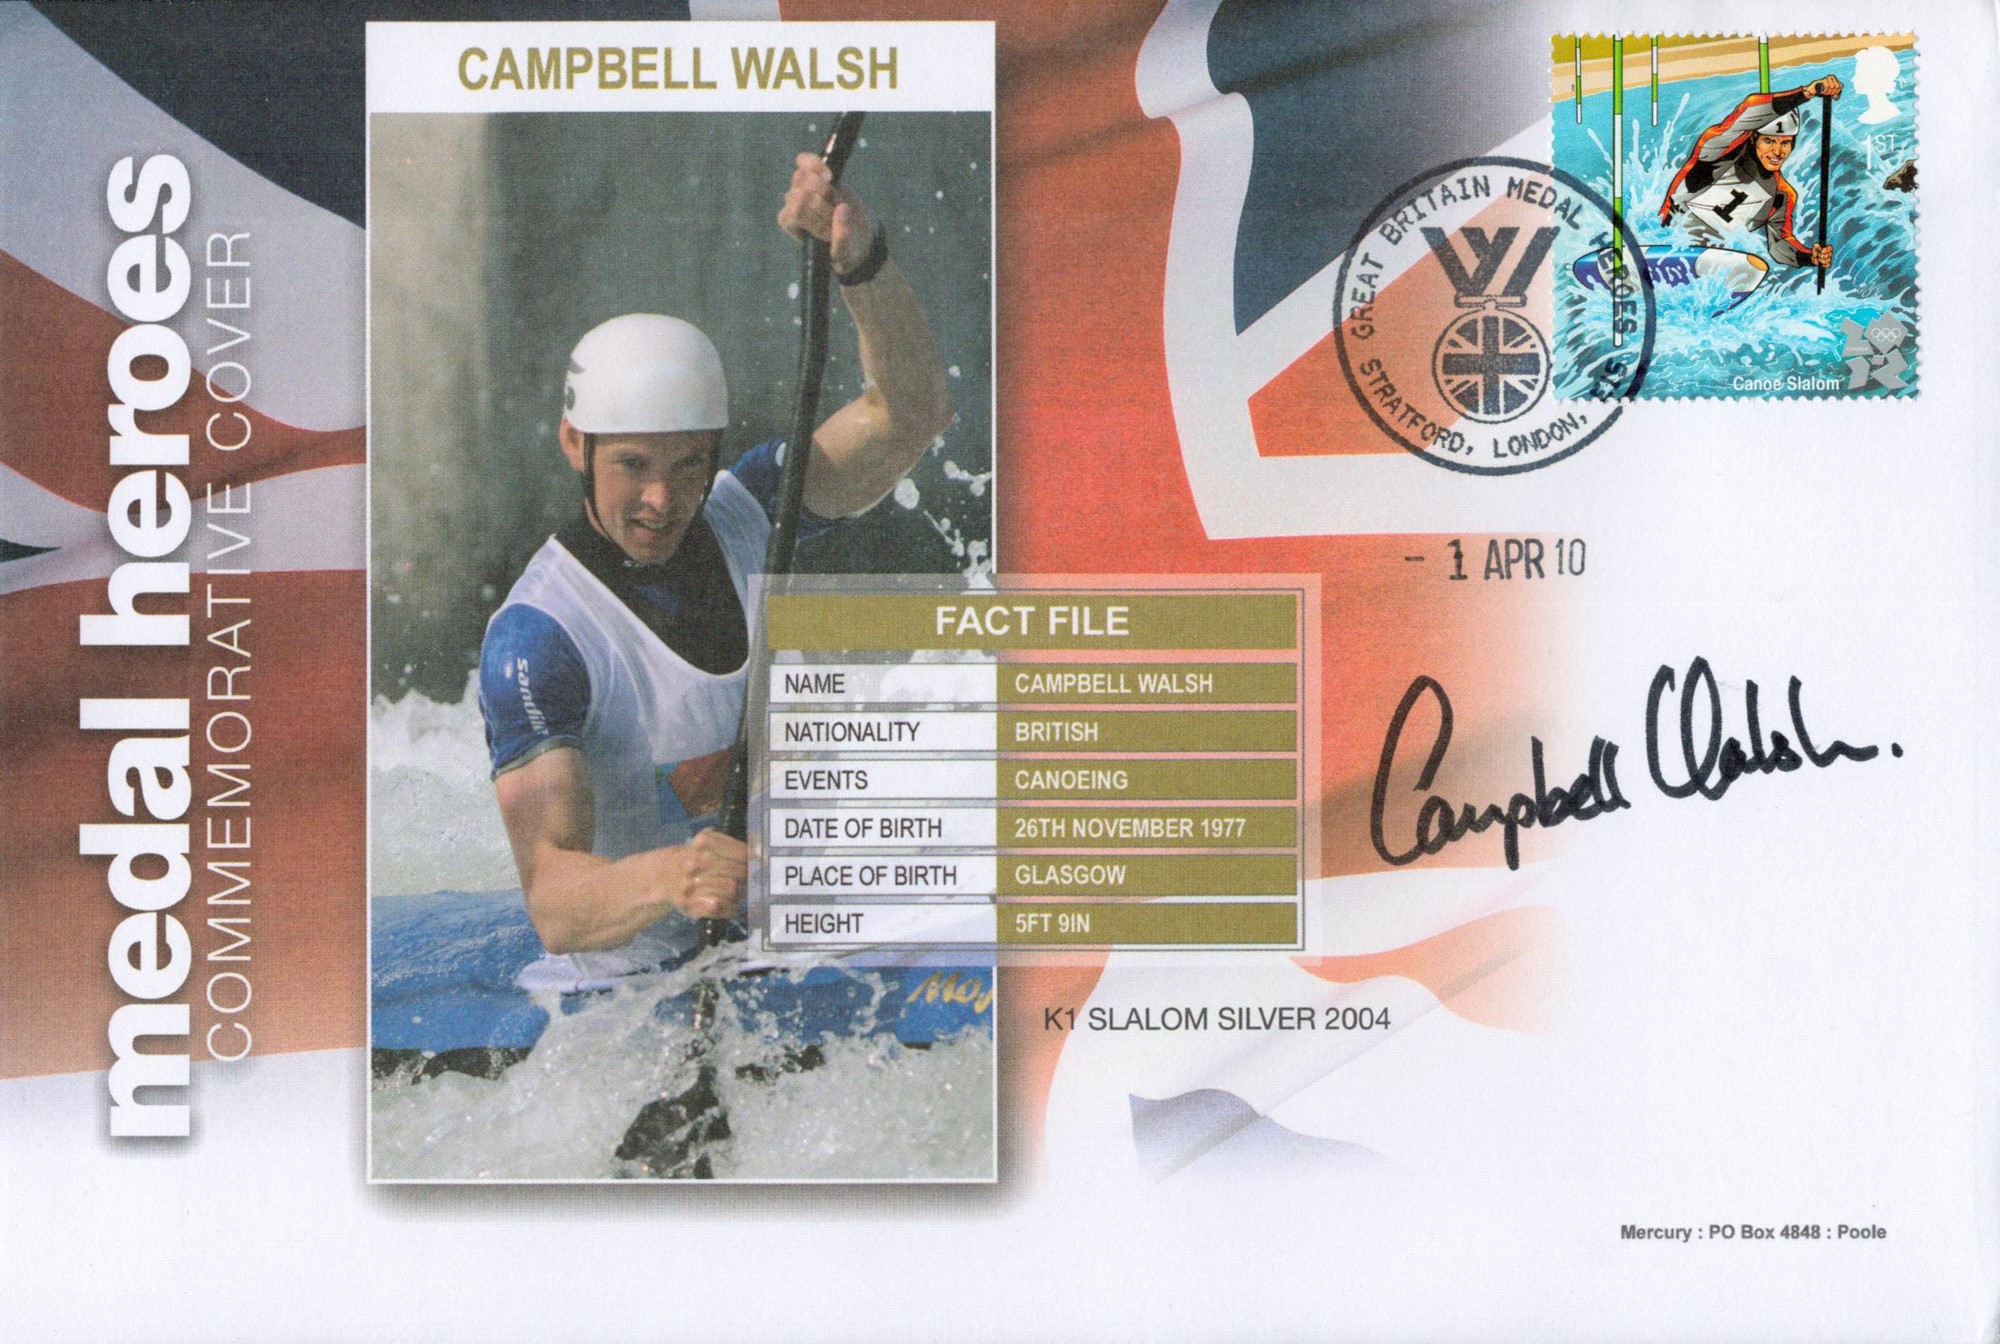 Olympics, Campbell Walsh signed Medal Heroes Commemorative Cover post marked 1st April 2010, London.